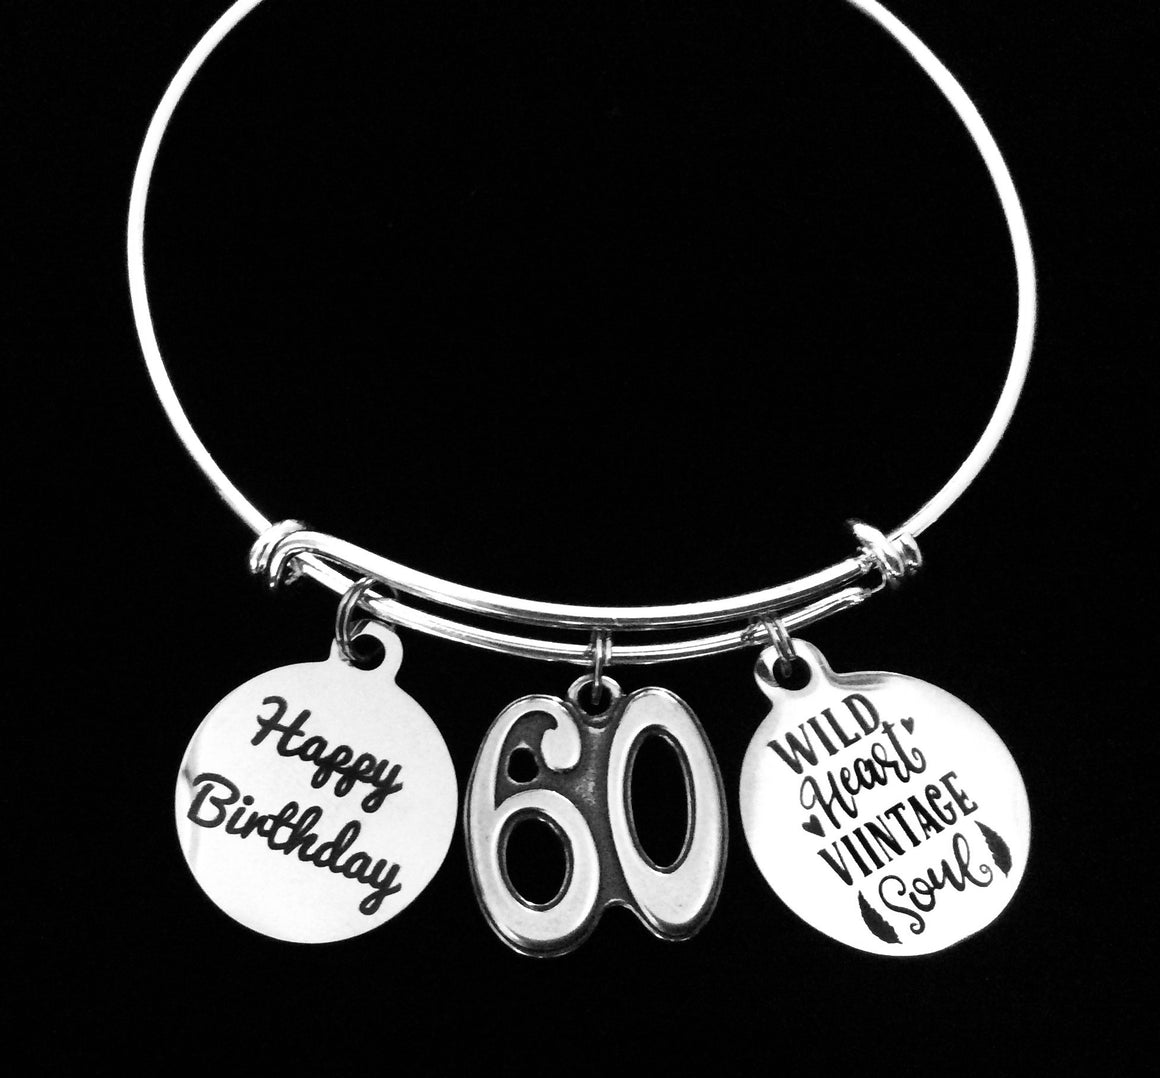 Wild Heart Vintage Soul 60th Birthday Gift for Women Expandable Charm Bracelet Adjustable One Size Fits All Happy 60 Birthday